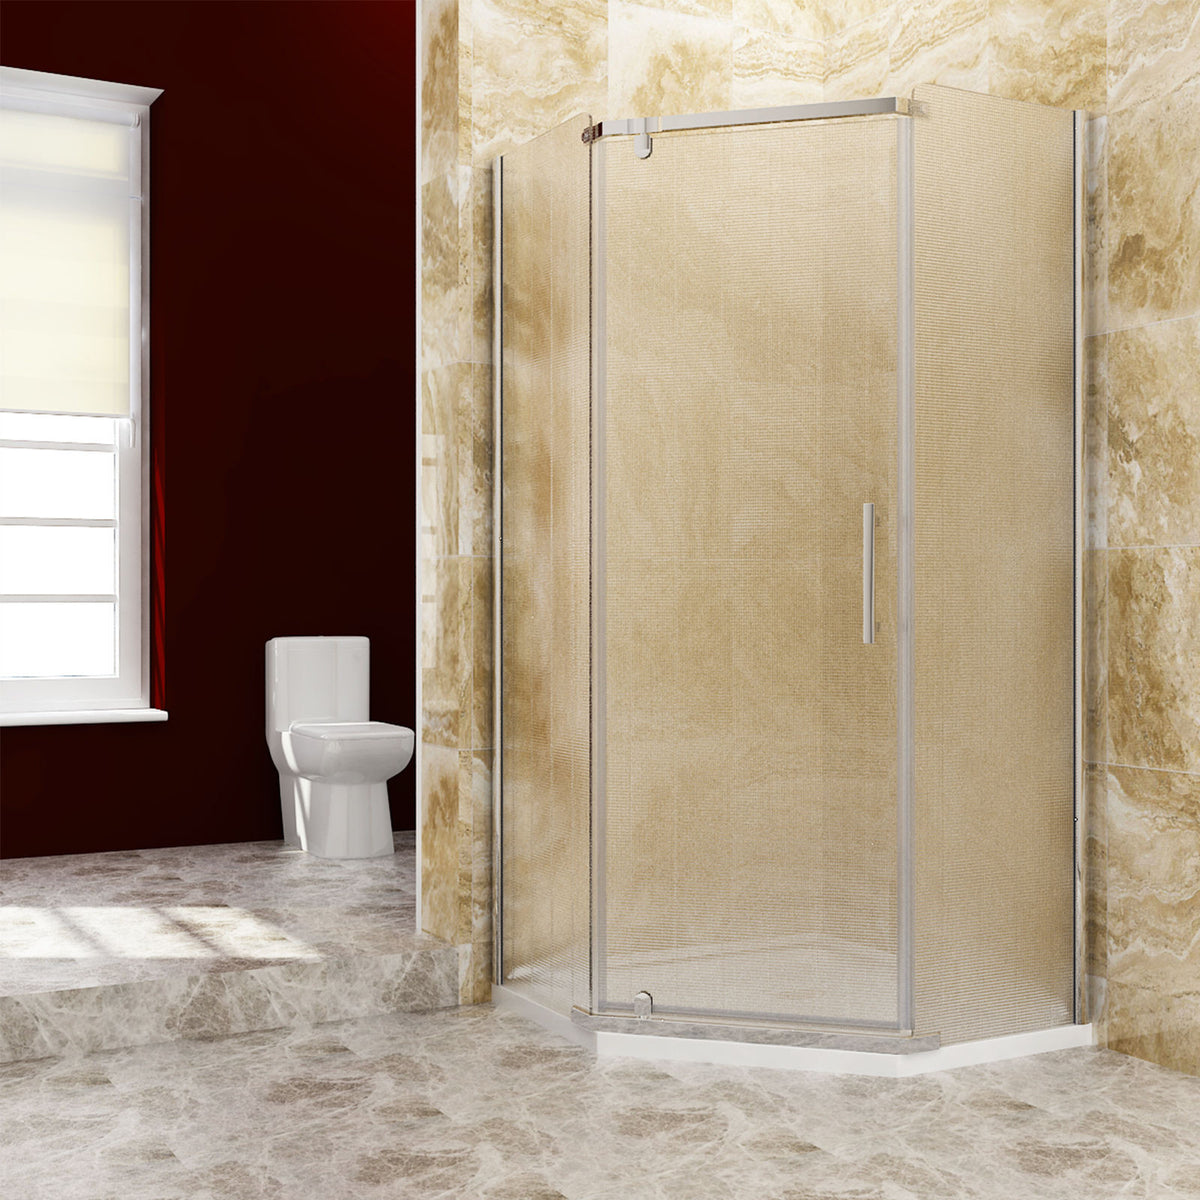 SUNNY SHOWER 36.7 in. W x 36.7 in. D x 71.8 in. H Frosted Chrome Finish Pivot Enclosures With Pivot Door